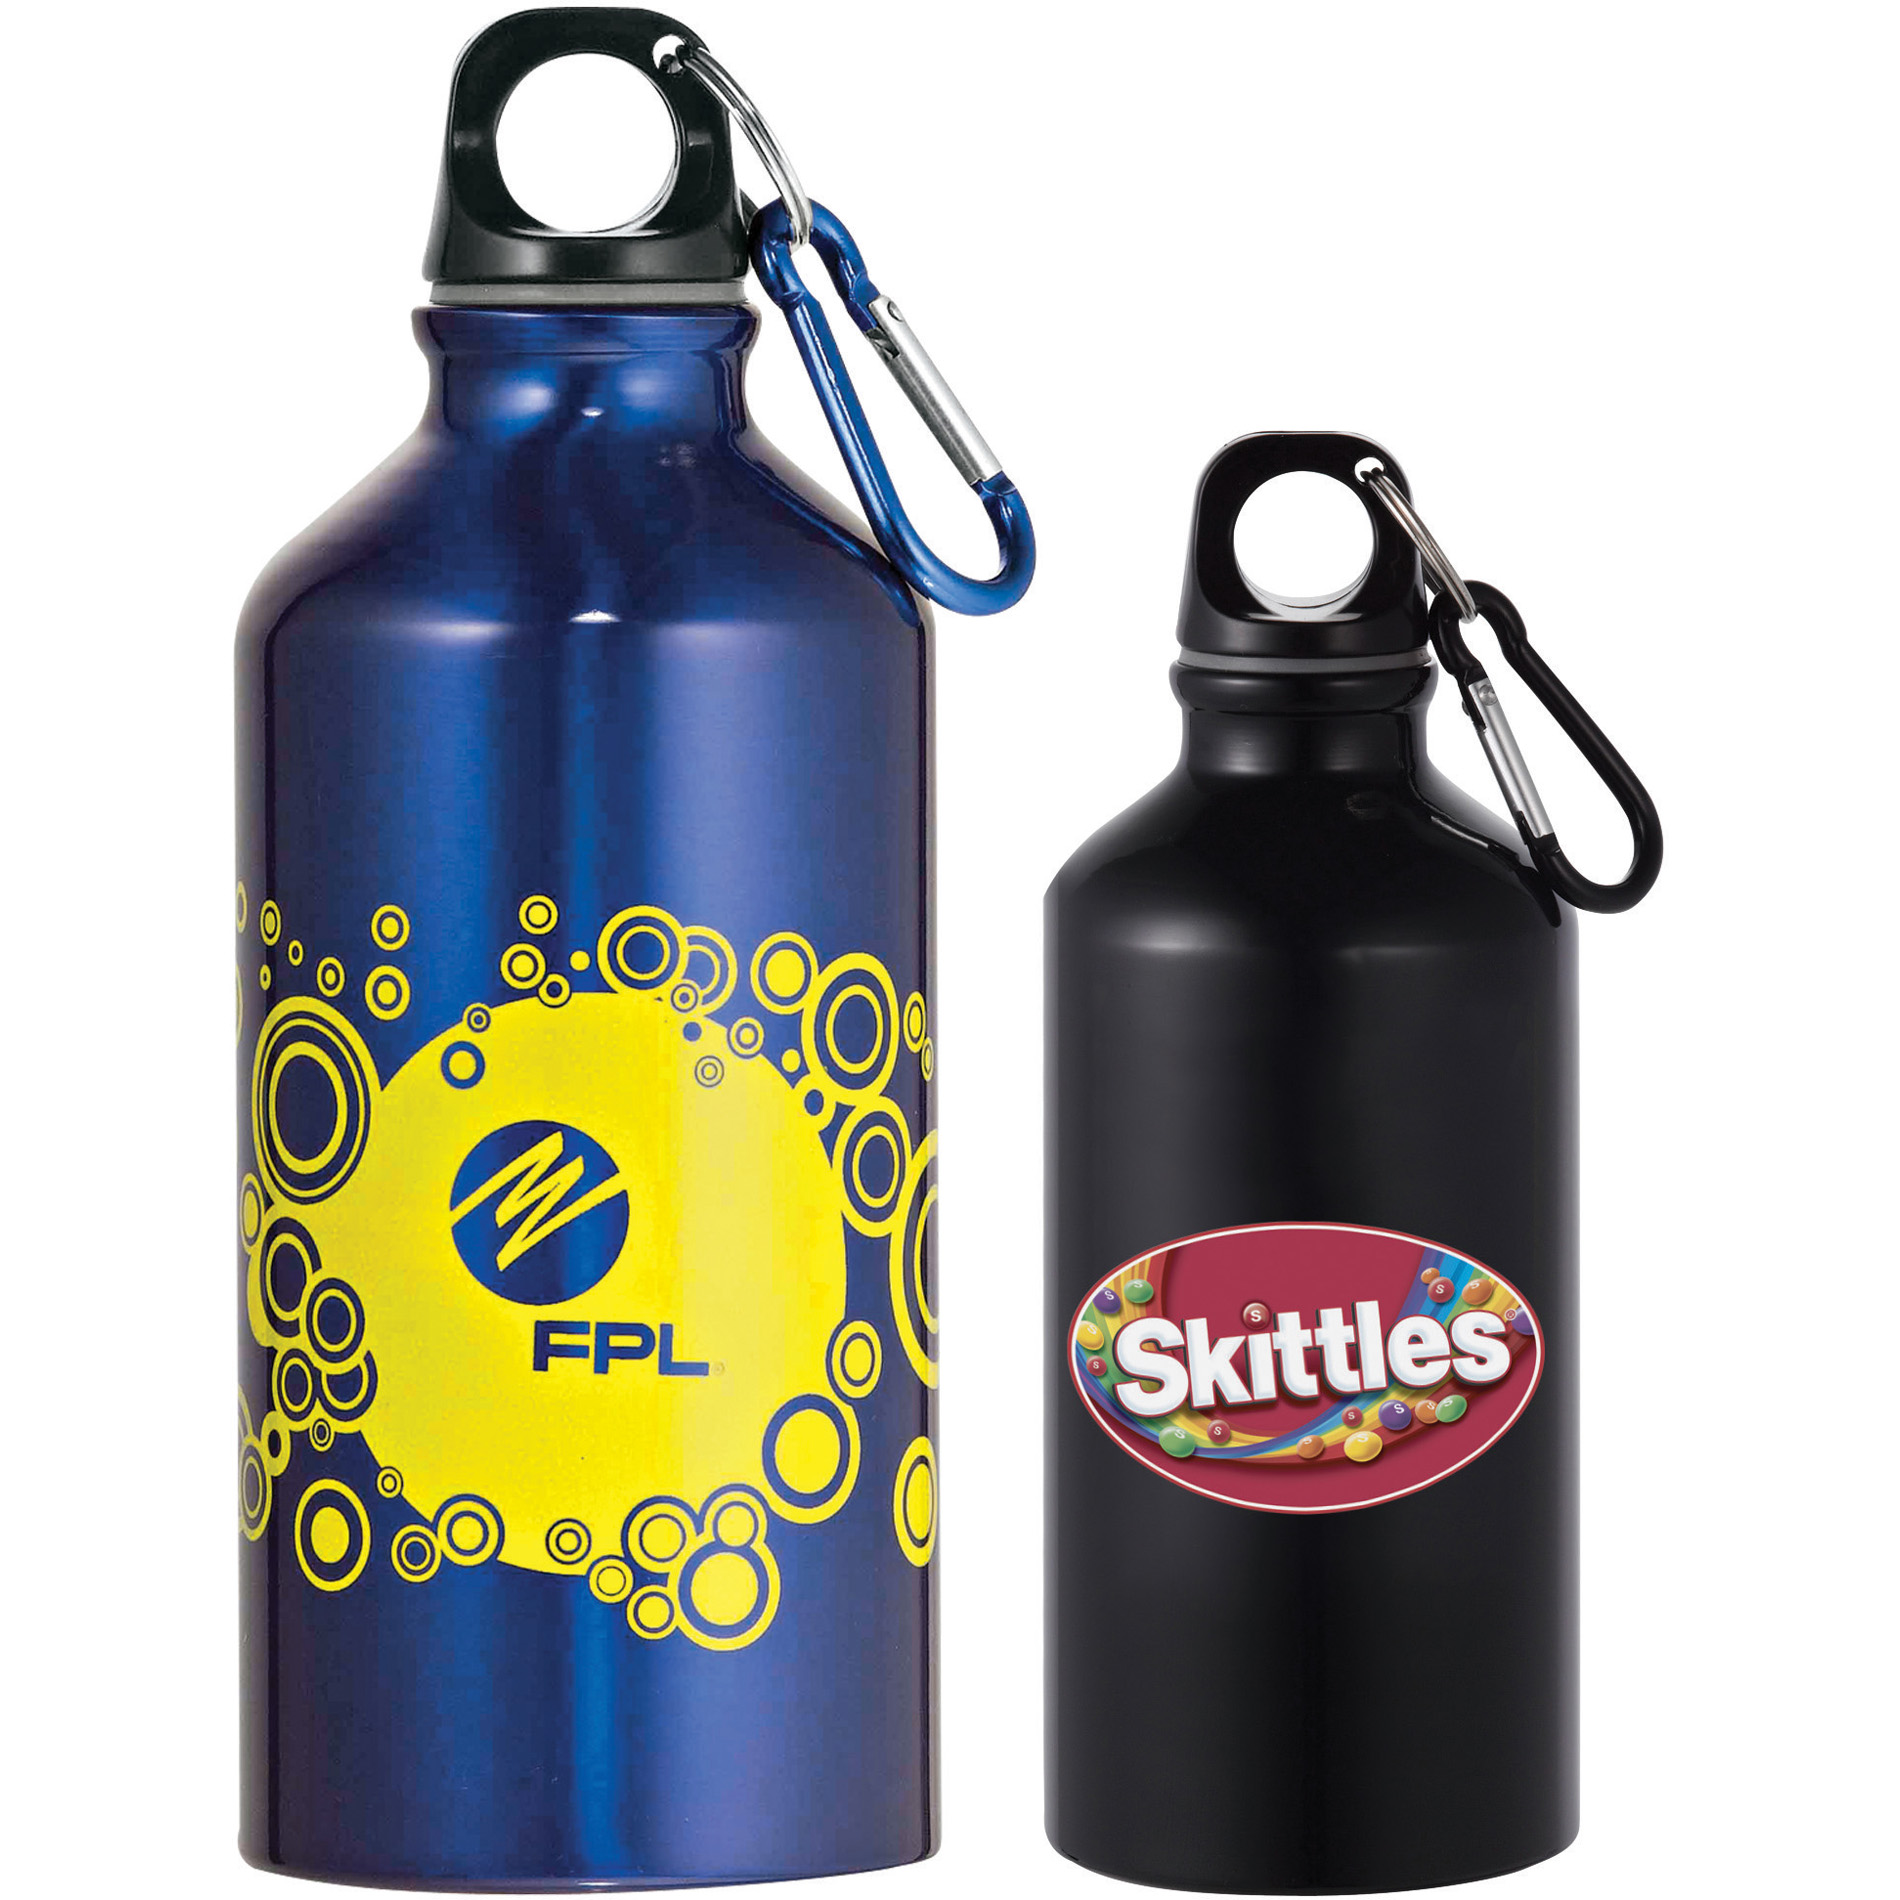 https://www.customizedlogowaterbottles.com/image/cache/catalog/product/972883105-1900x1900.jpg